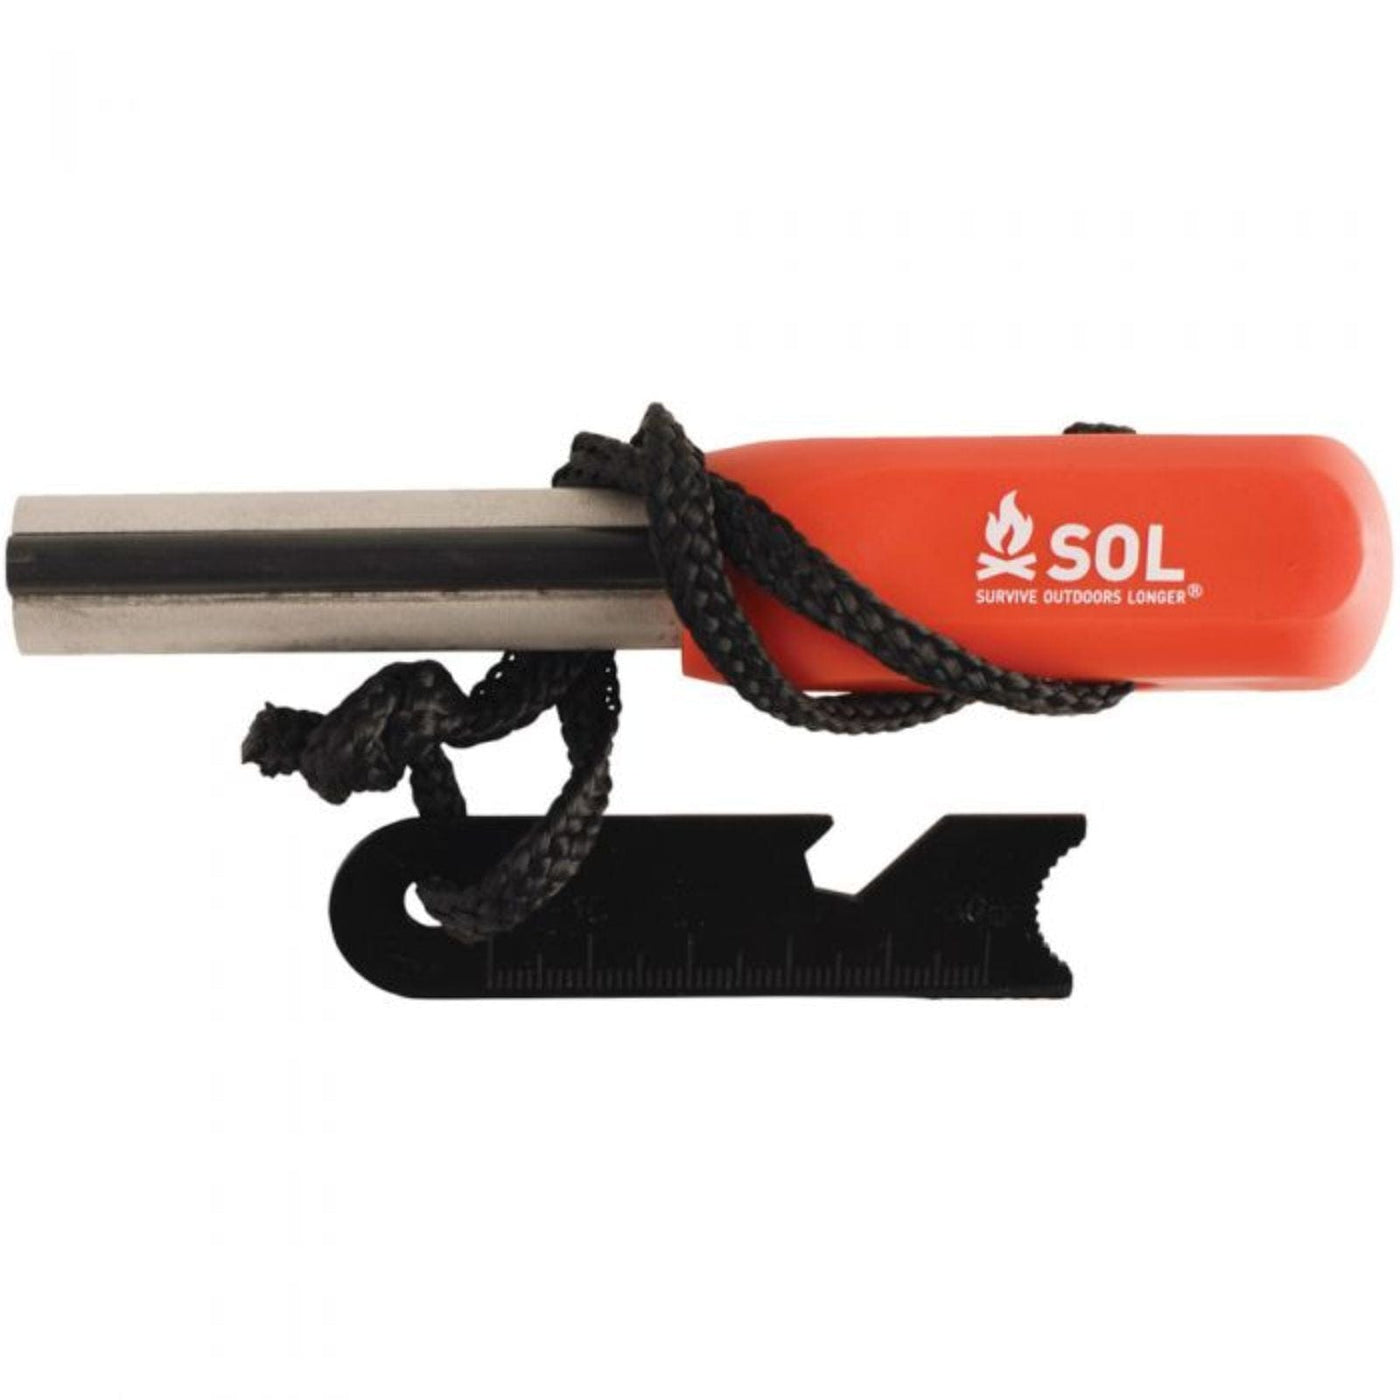 SOL SOL Mag Striker with Tinder Cord Camping And Outdoor